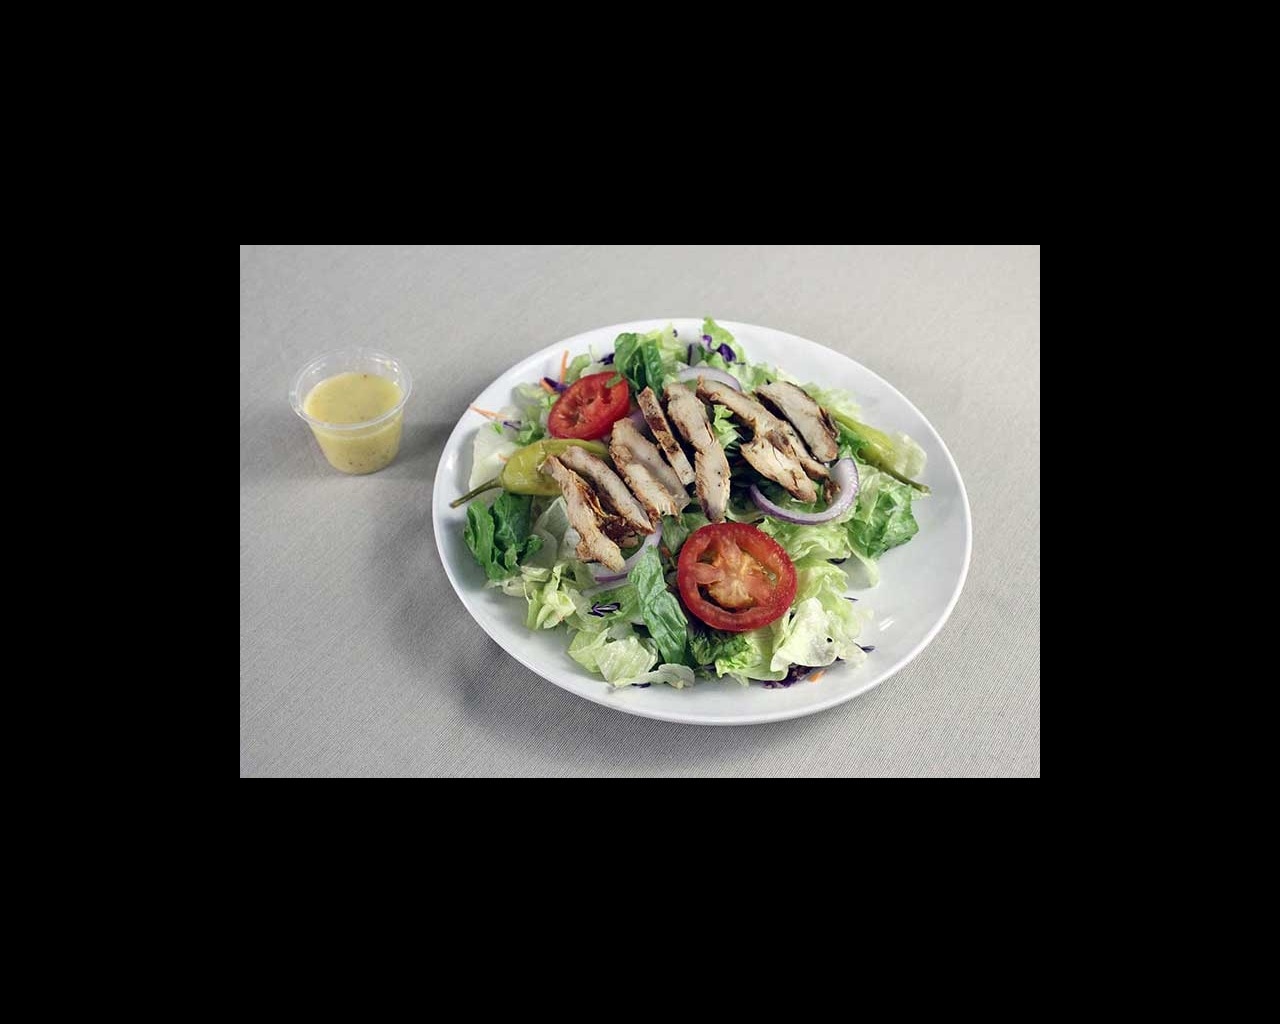 salad with dressing on side